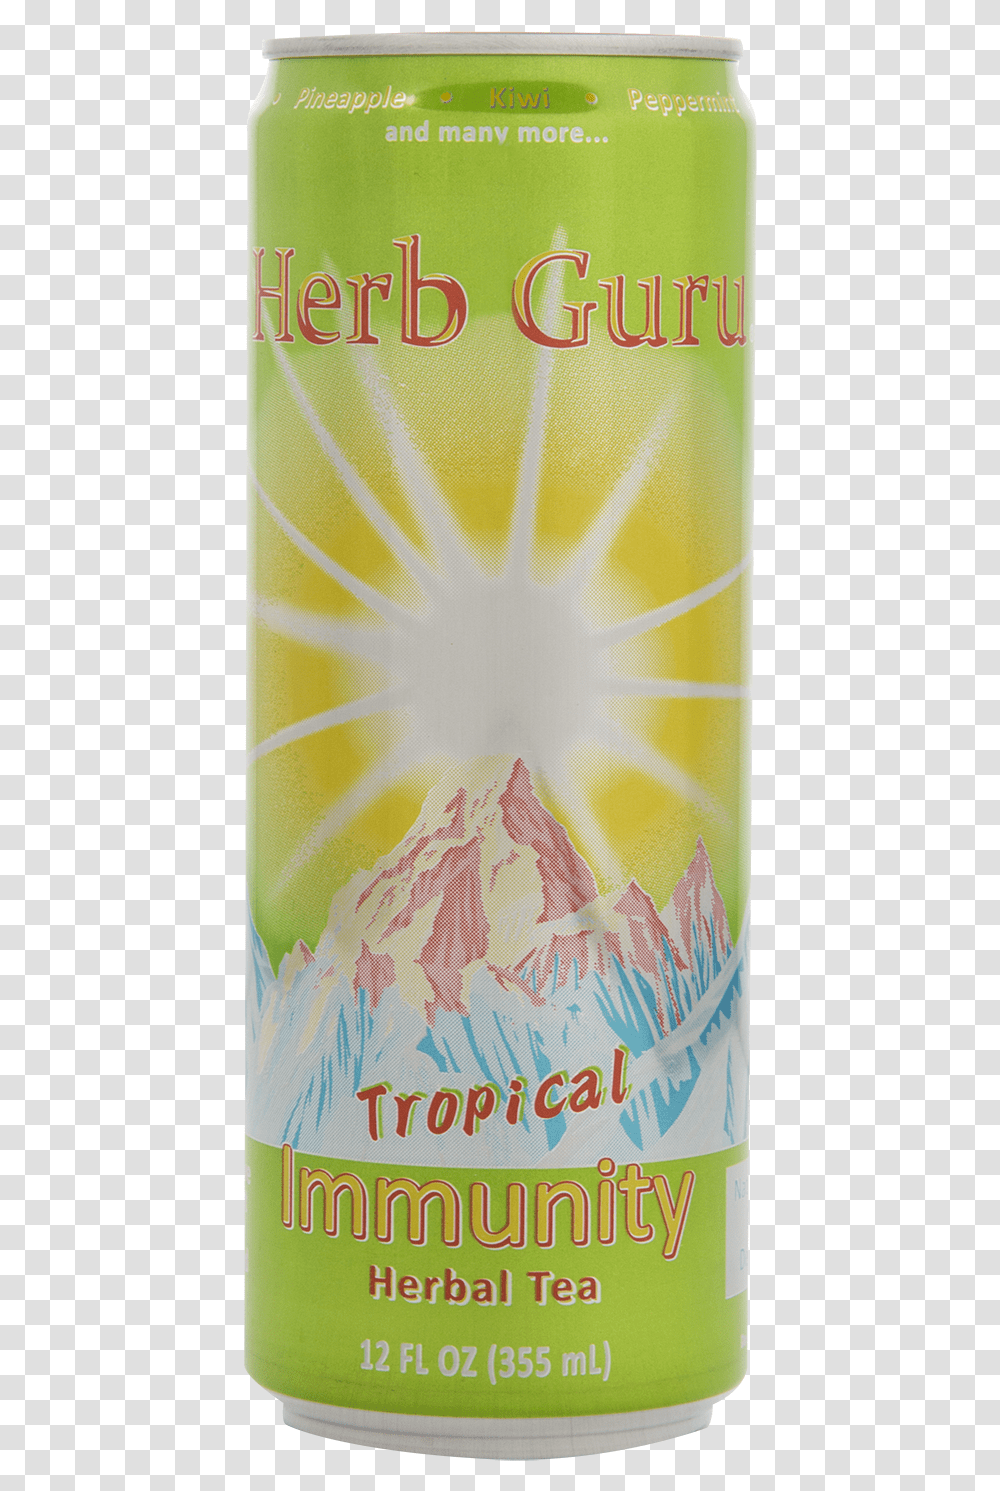 Tropical Immunity Herbal Tea Caffeinated Drink, Tin, Can, Spray Can, Bottle Transparent Png